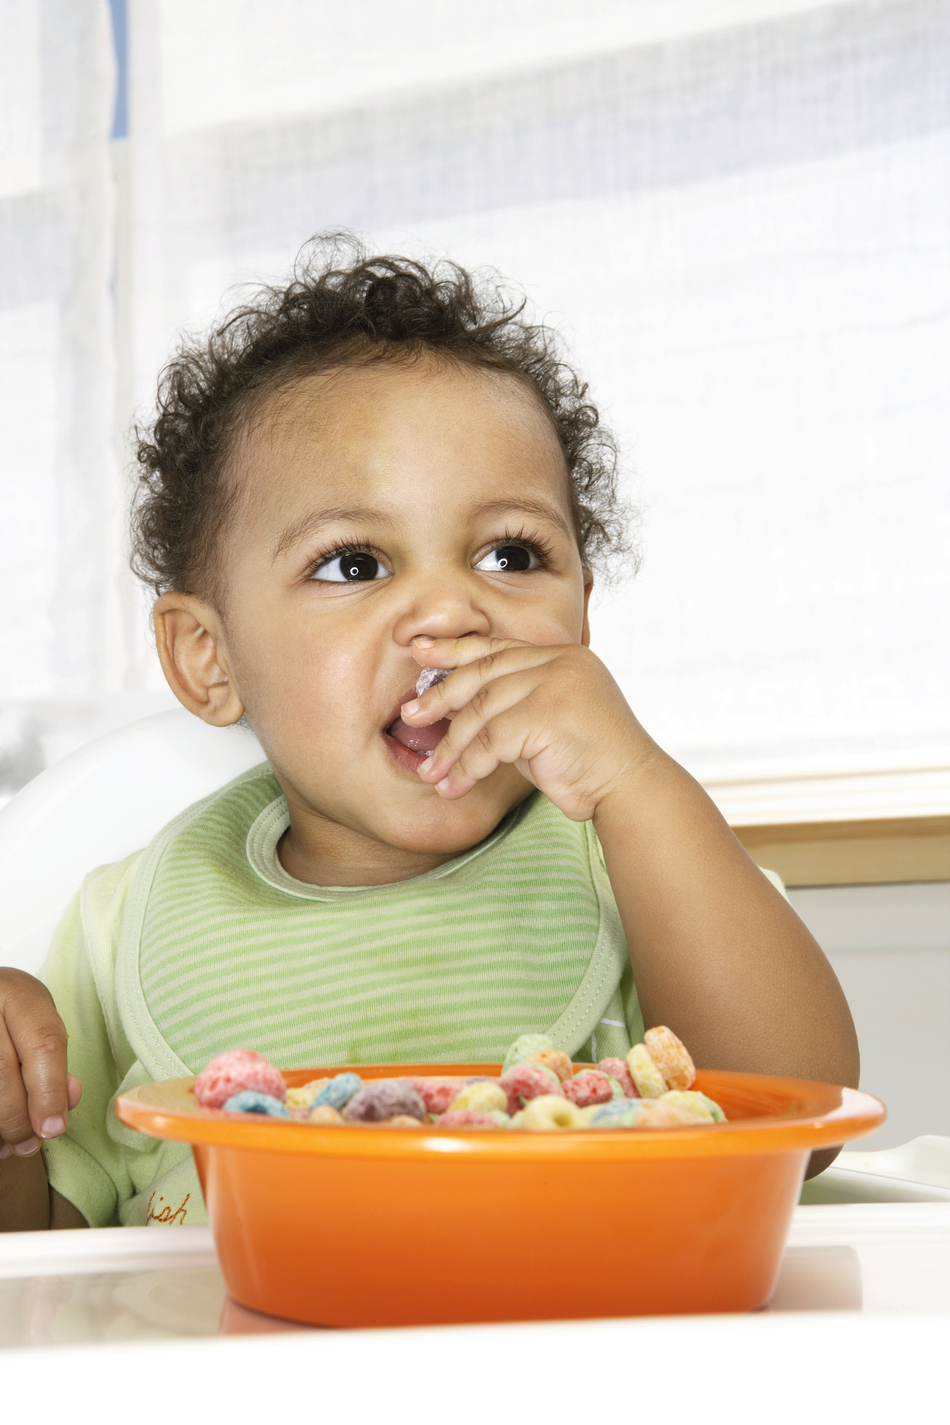 Debunking Old Wives' Tales: What You Should and Shouldn’t Be Feeding Your Baby